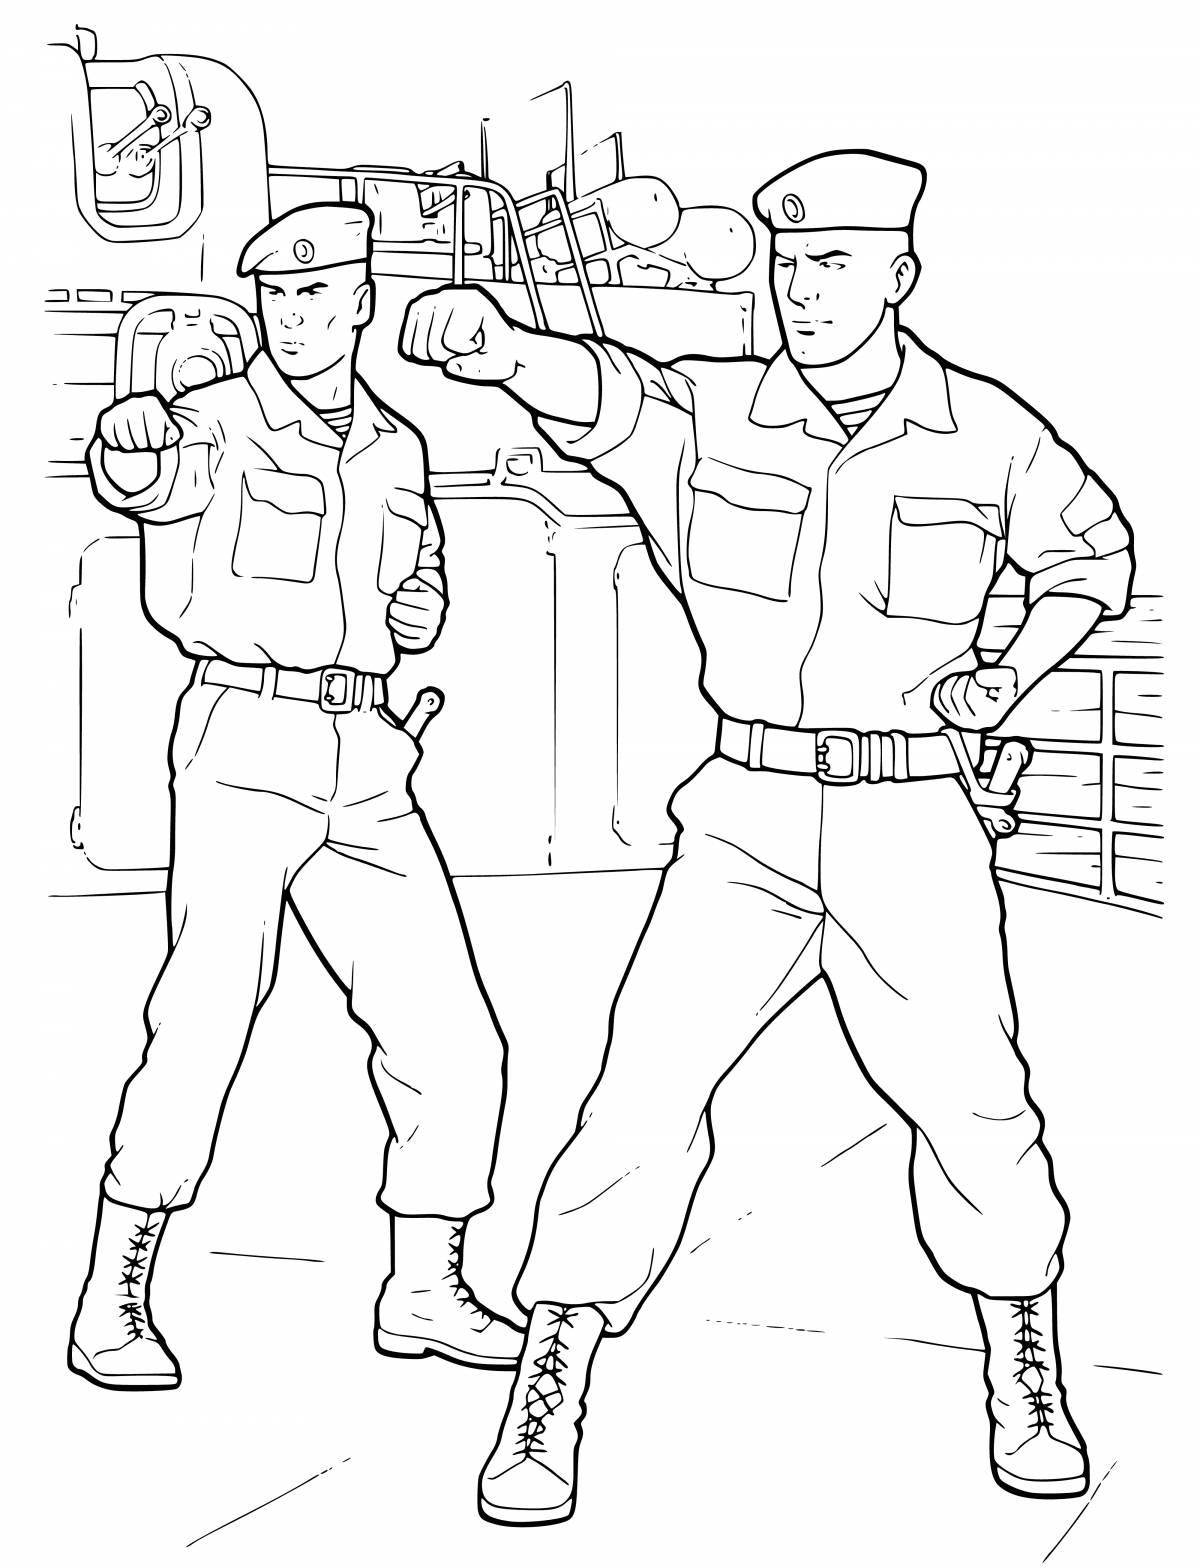 Brave soldiers coloring pages